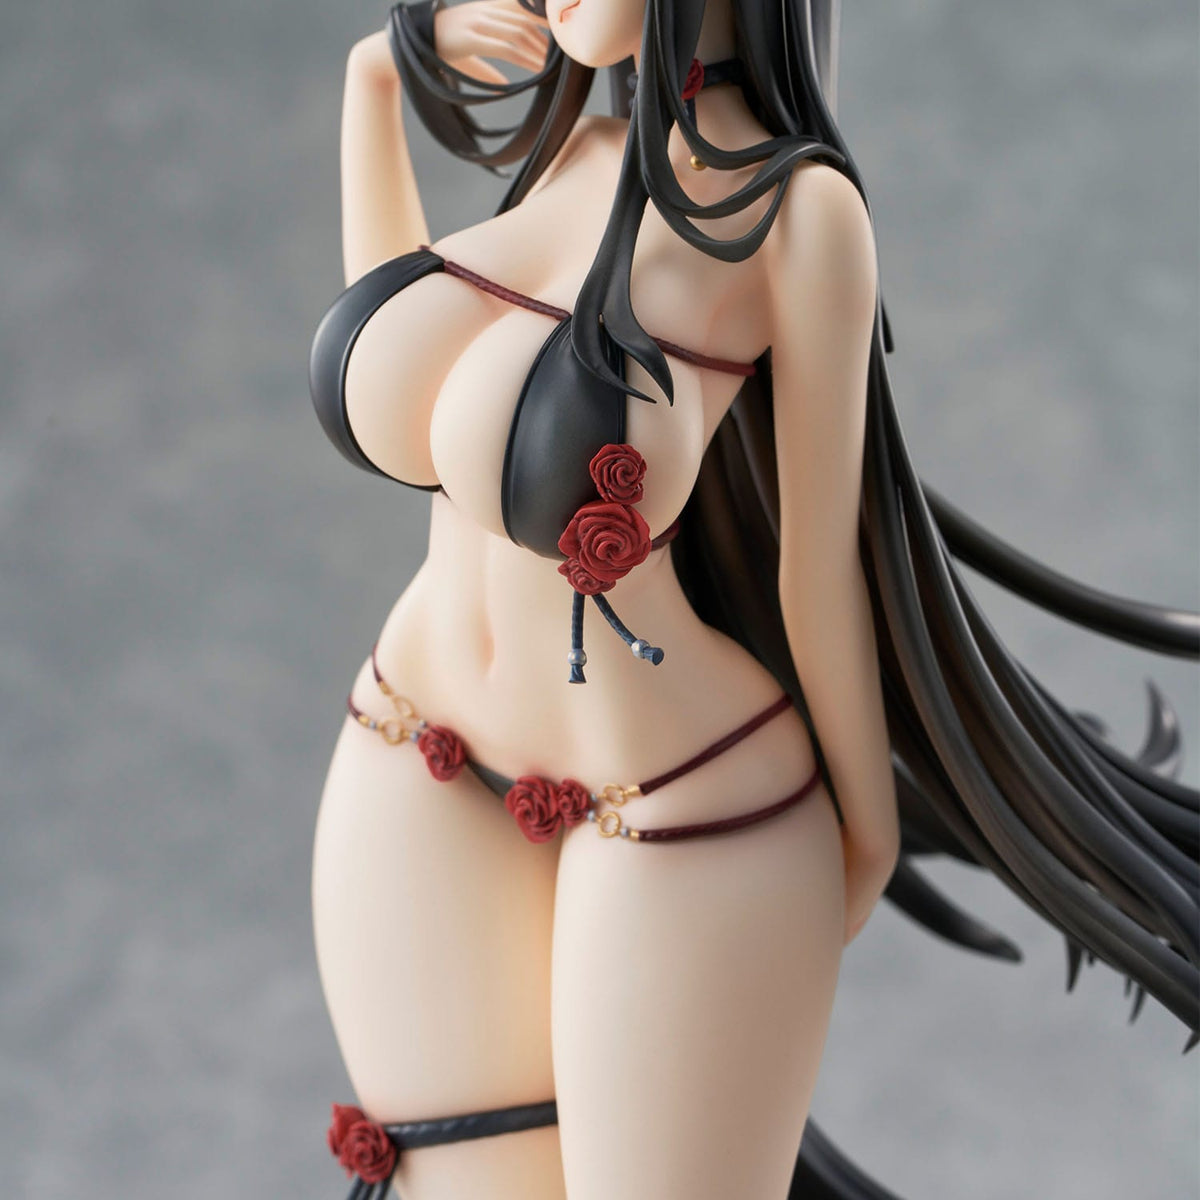 Original character - rose - by Tacco - Figure 1/6 (Union Creative)